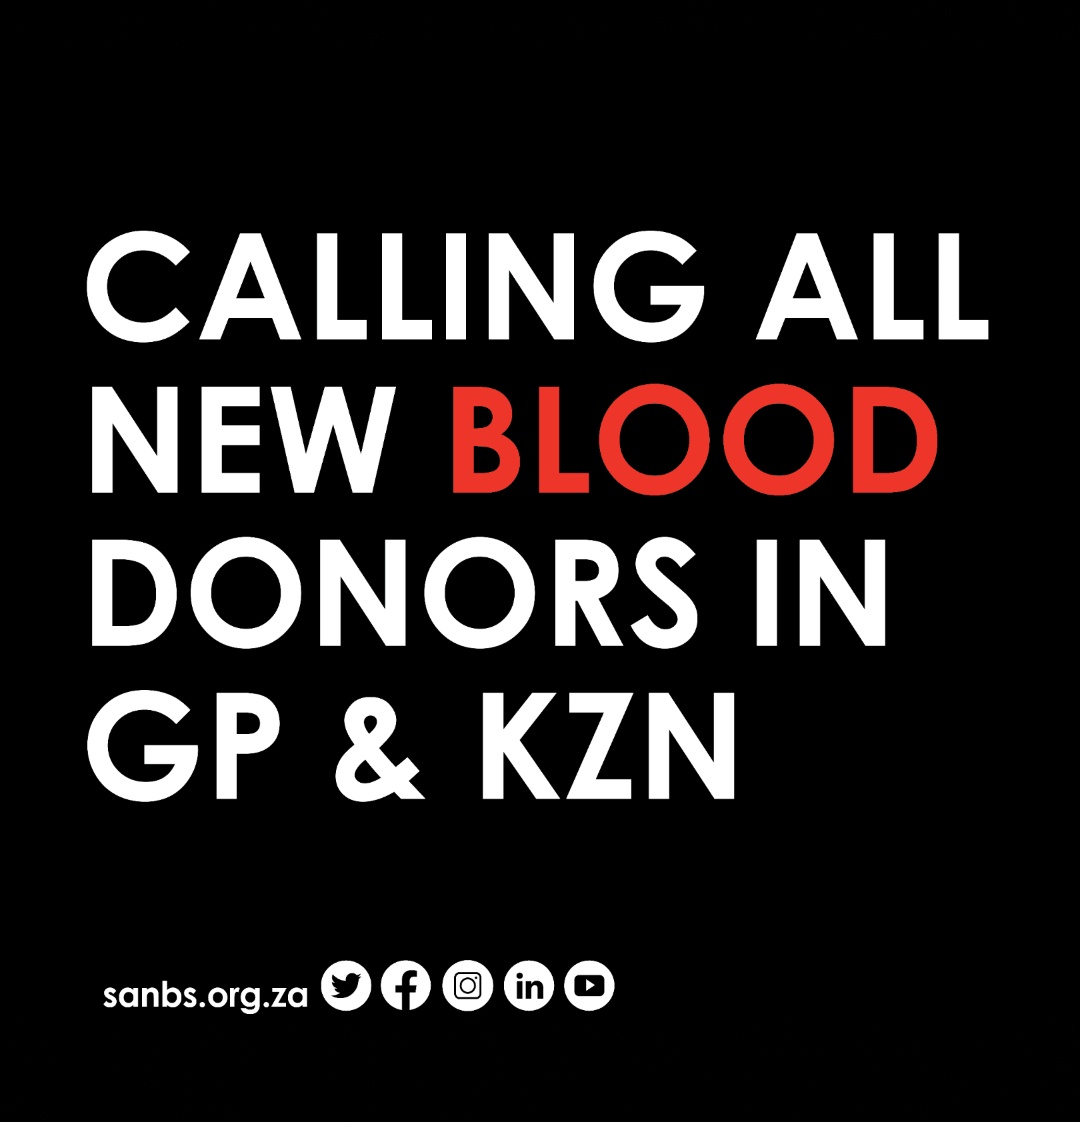 Blood Group O is considered the universal blood group because anyone - regardless of blood type - can receive Type O blood. You guys are special and we need your blood urgently!I'm Blood Group B+ and I'll be donating. Find out where your nearest  @theSANBS centre is and donate